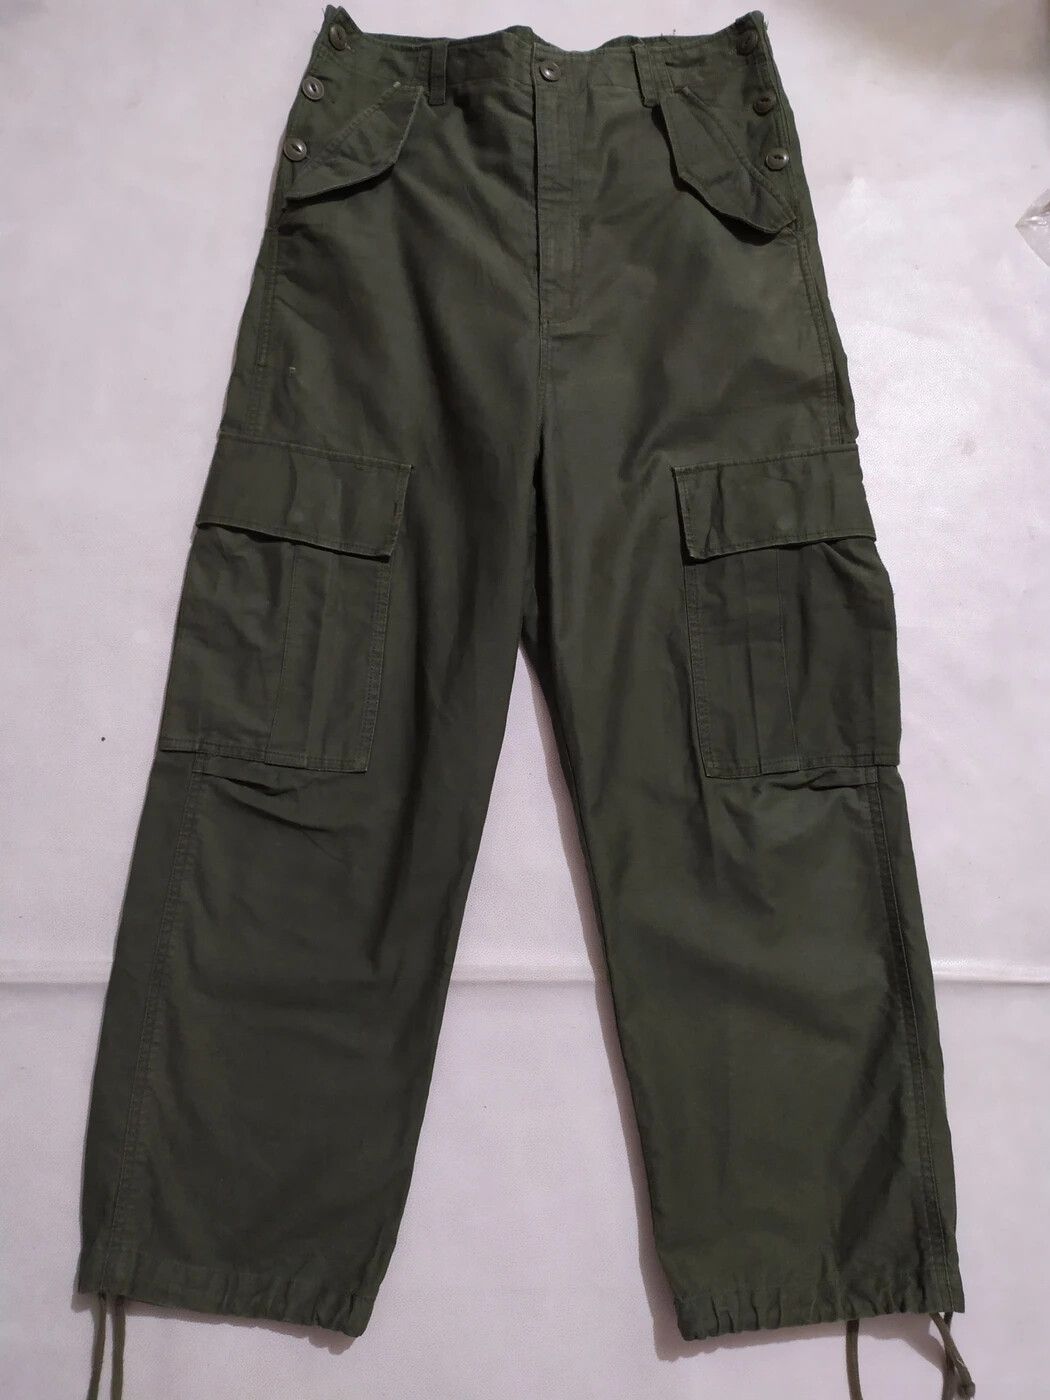 Japanese Brand Cargo Pants Size US 31 - 1 Preview